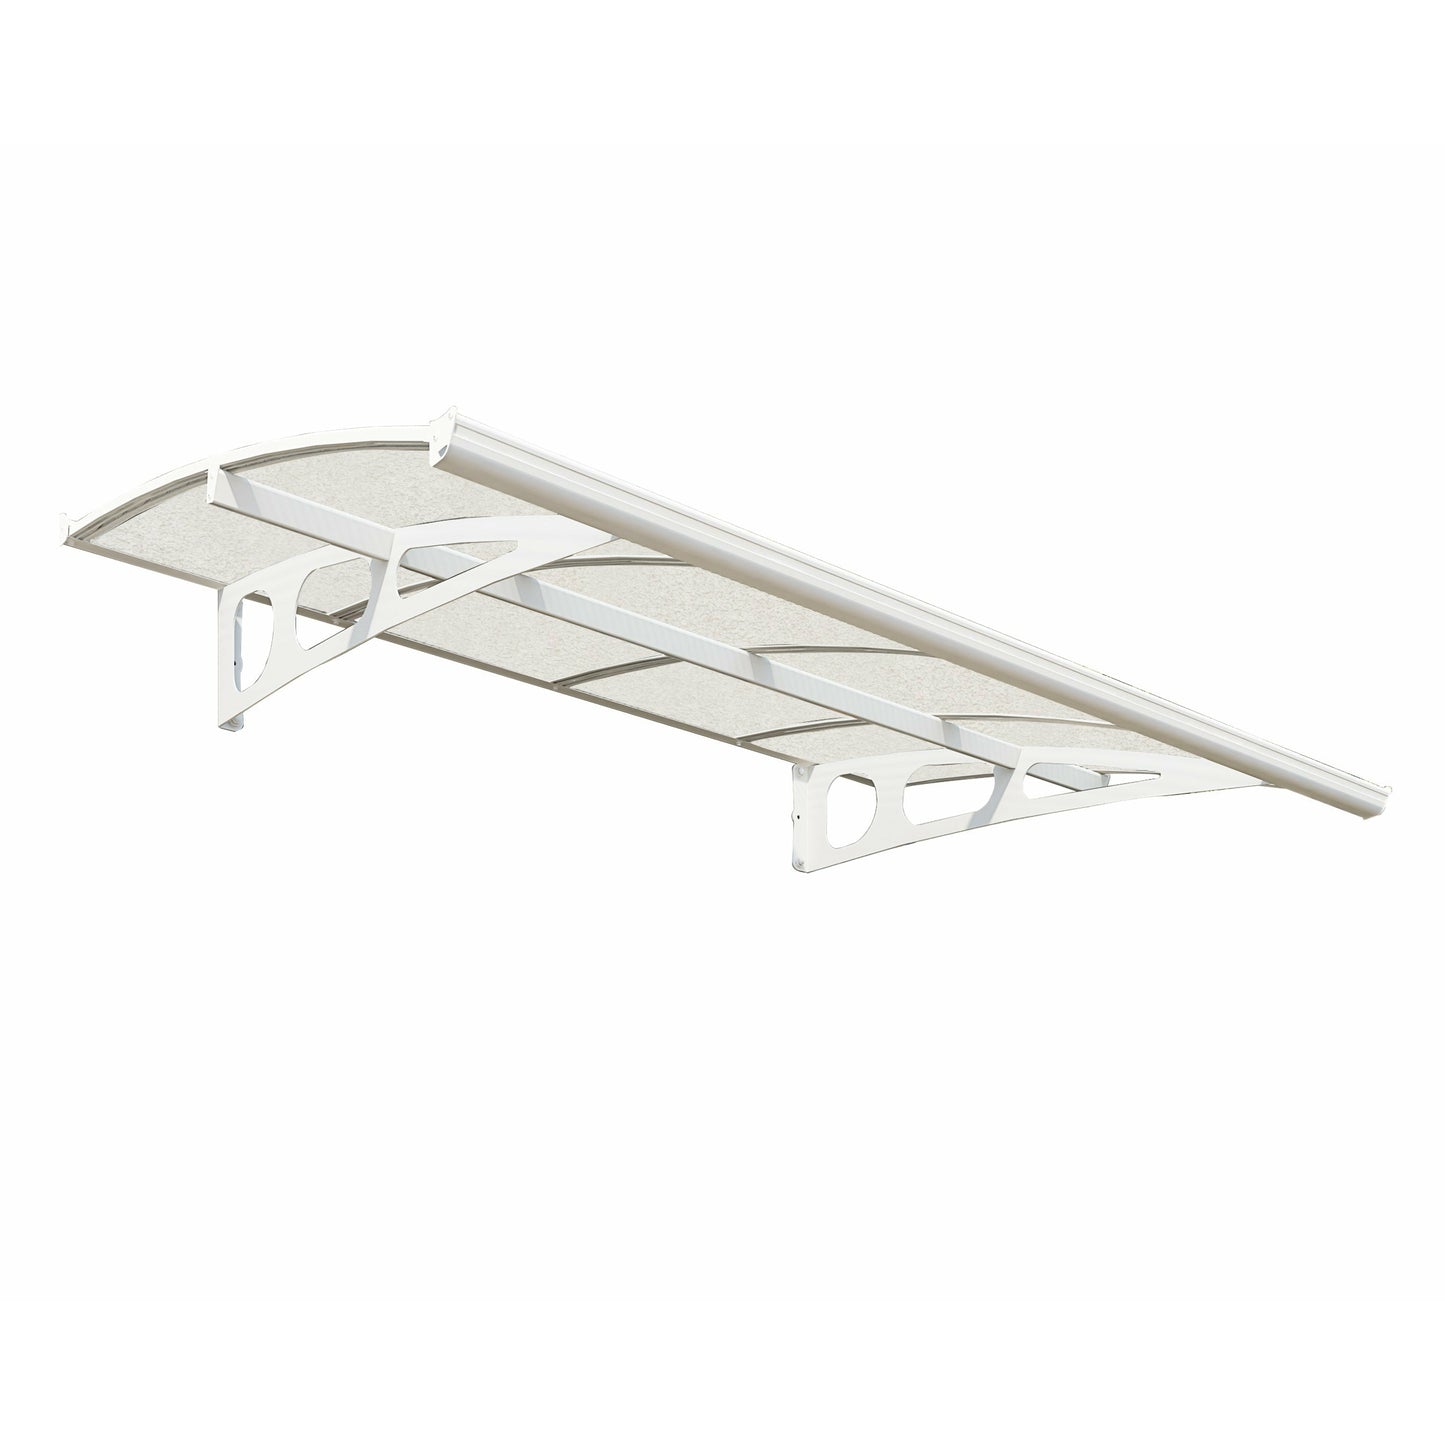 Palram Bordeaux 4460 Awning-Clear